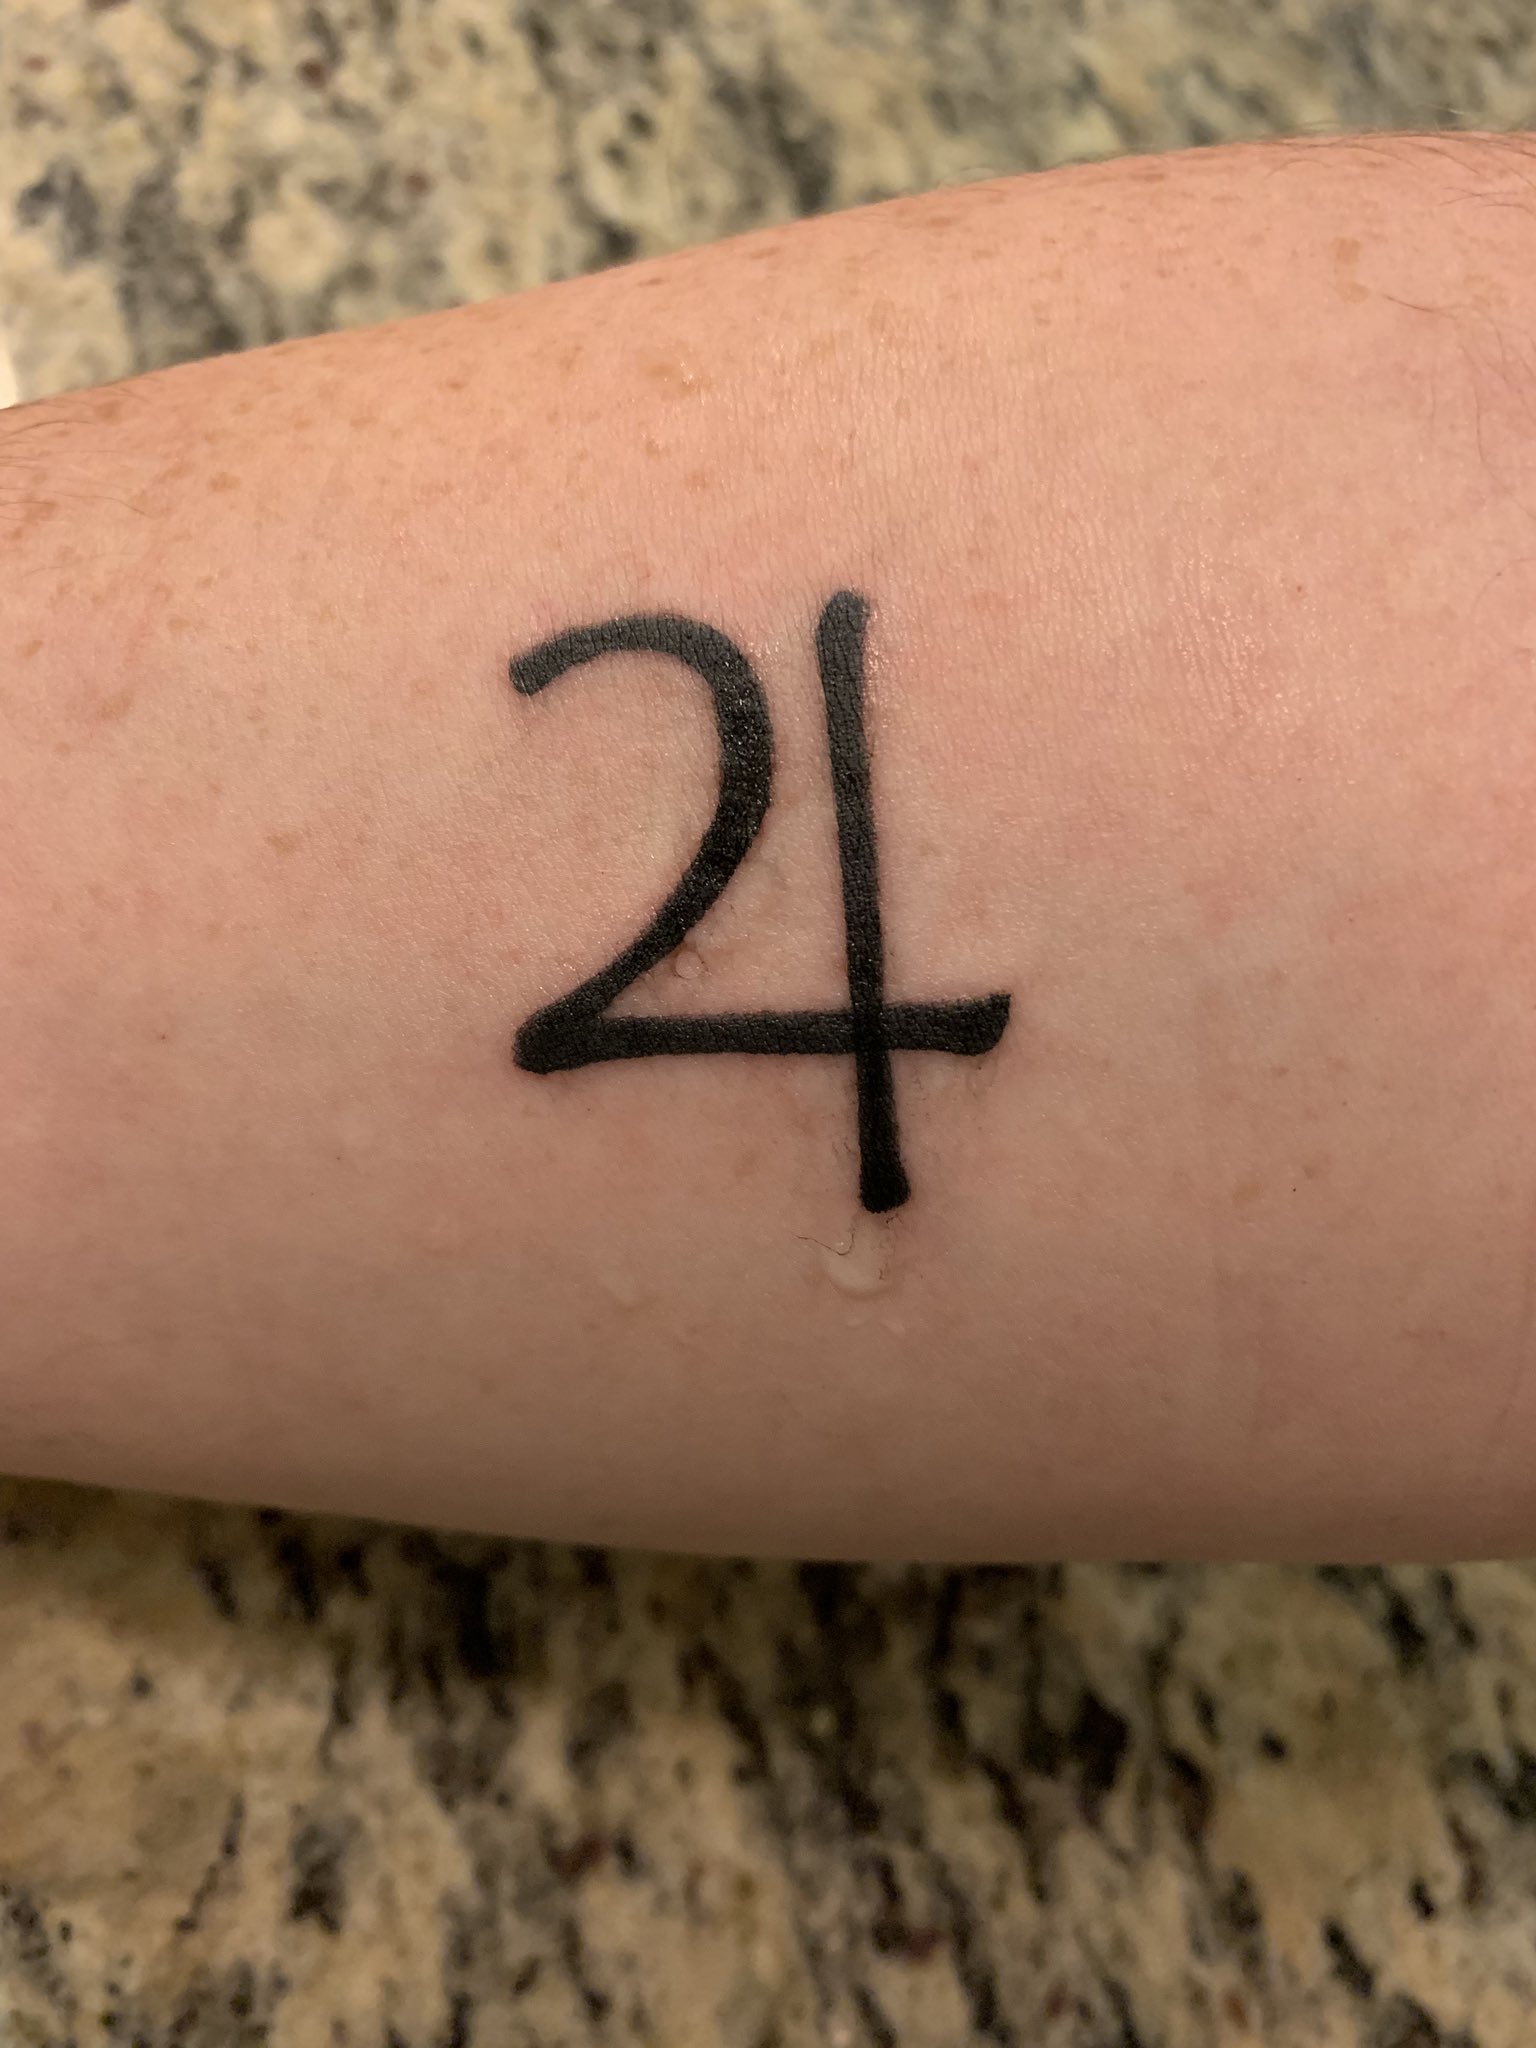 The answer to the question of life universe and everything according to  the hitchhikers guide to the galaxy is now written on my wrist Done by  Johan at seven sins tattoo Linköping